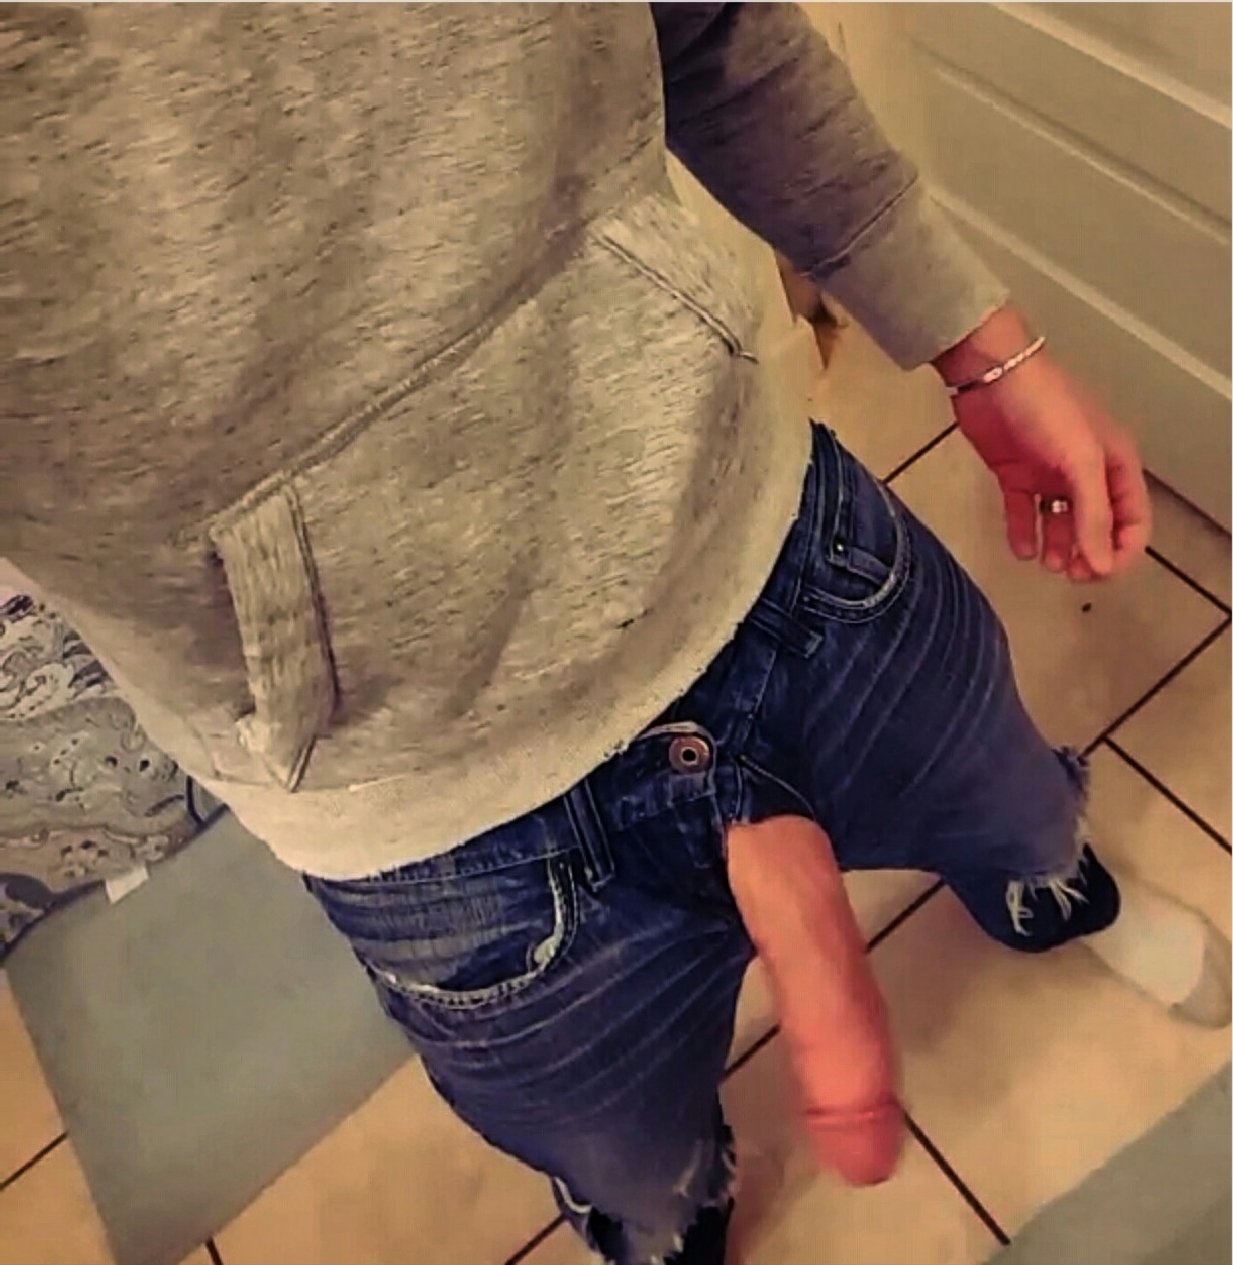 cock-out-of-jeans.jpg